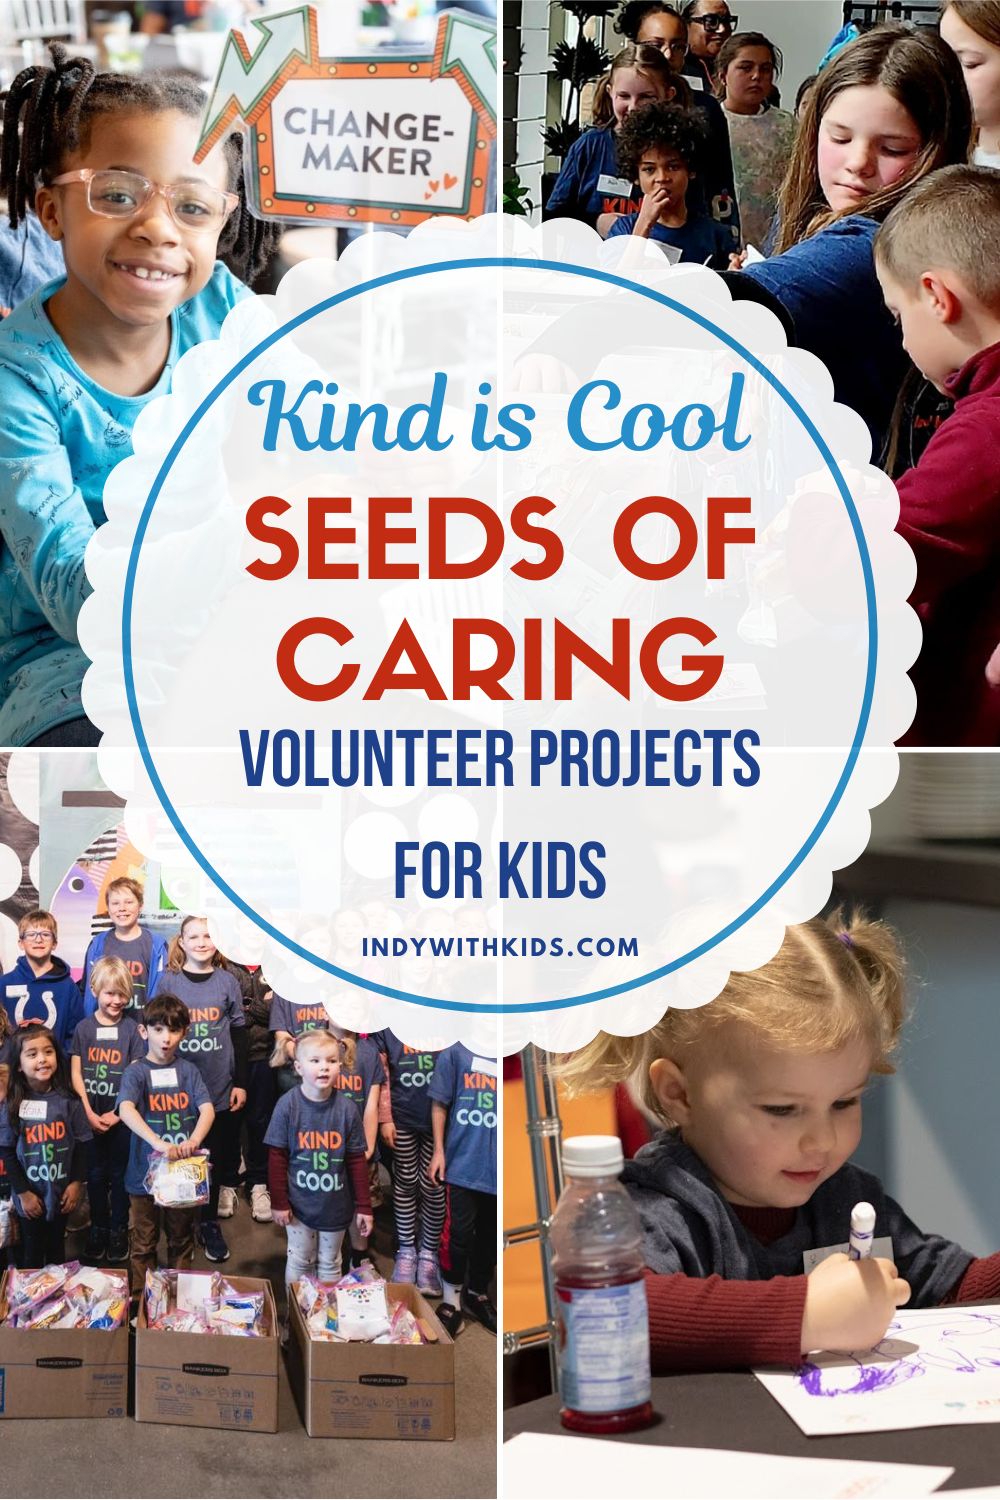 Seeds of Caring teaches kids that being Kind is Cool.